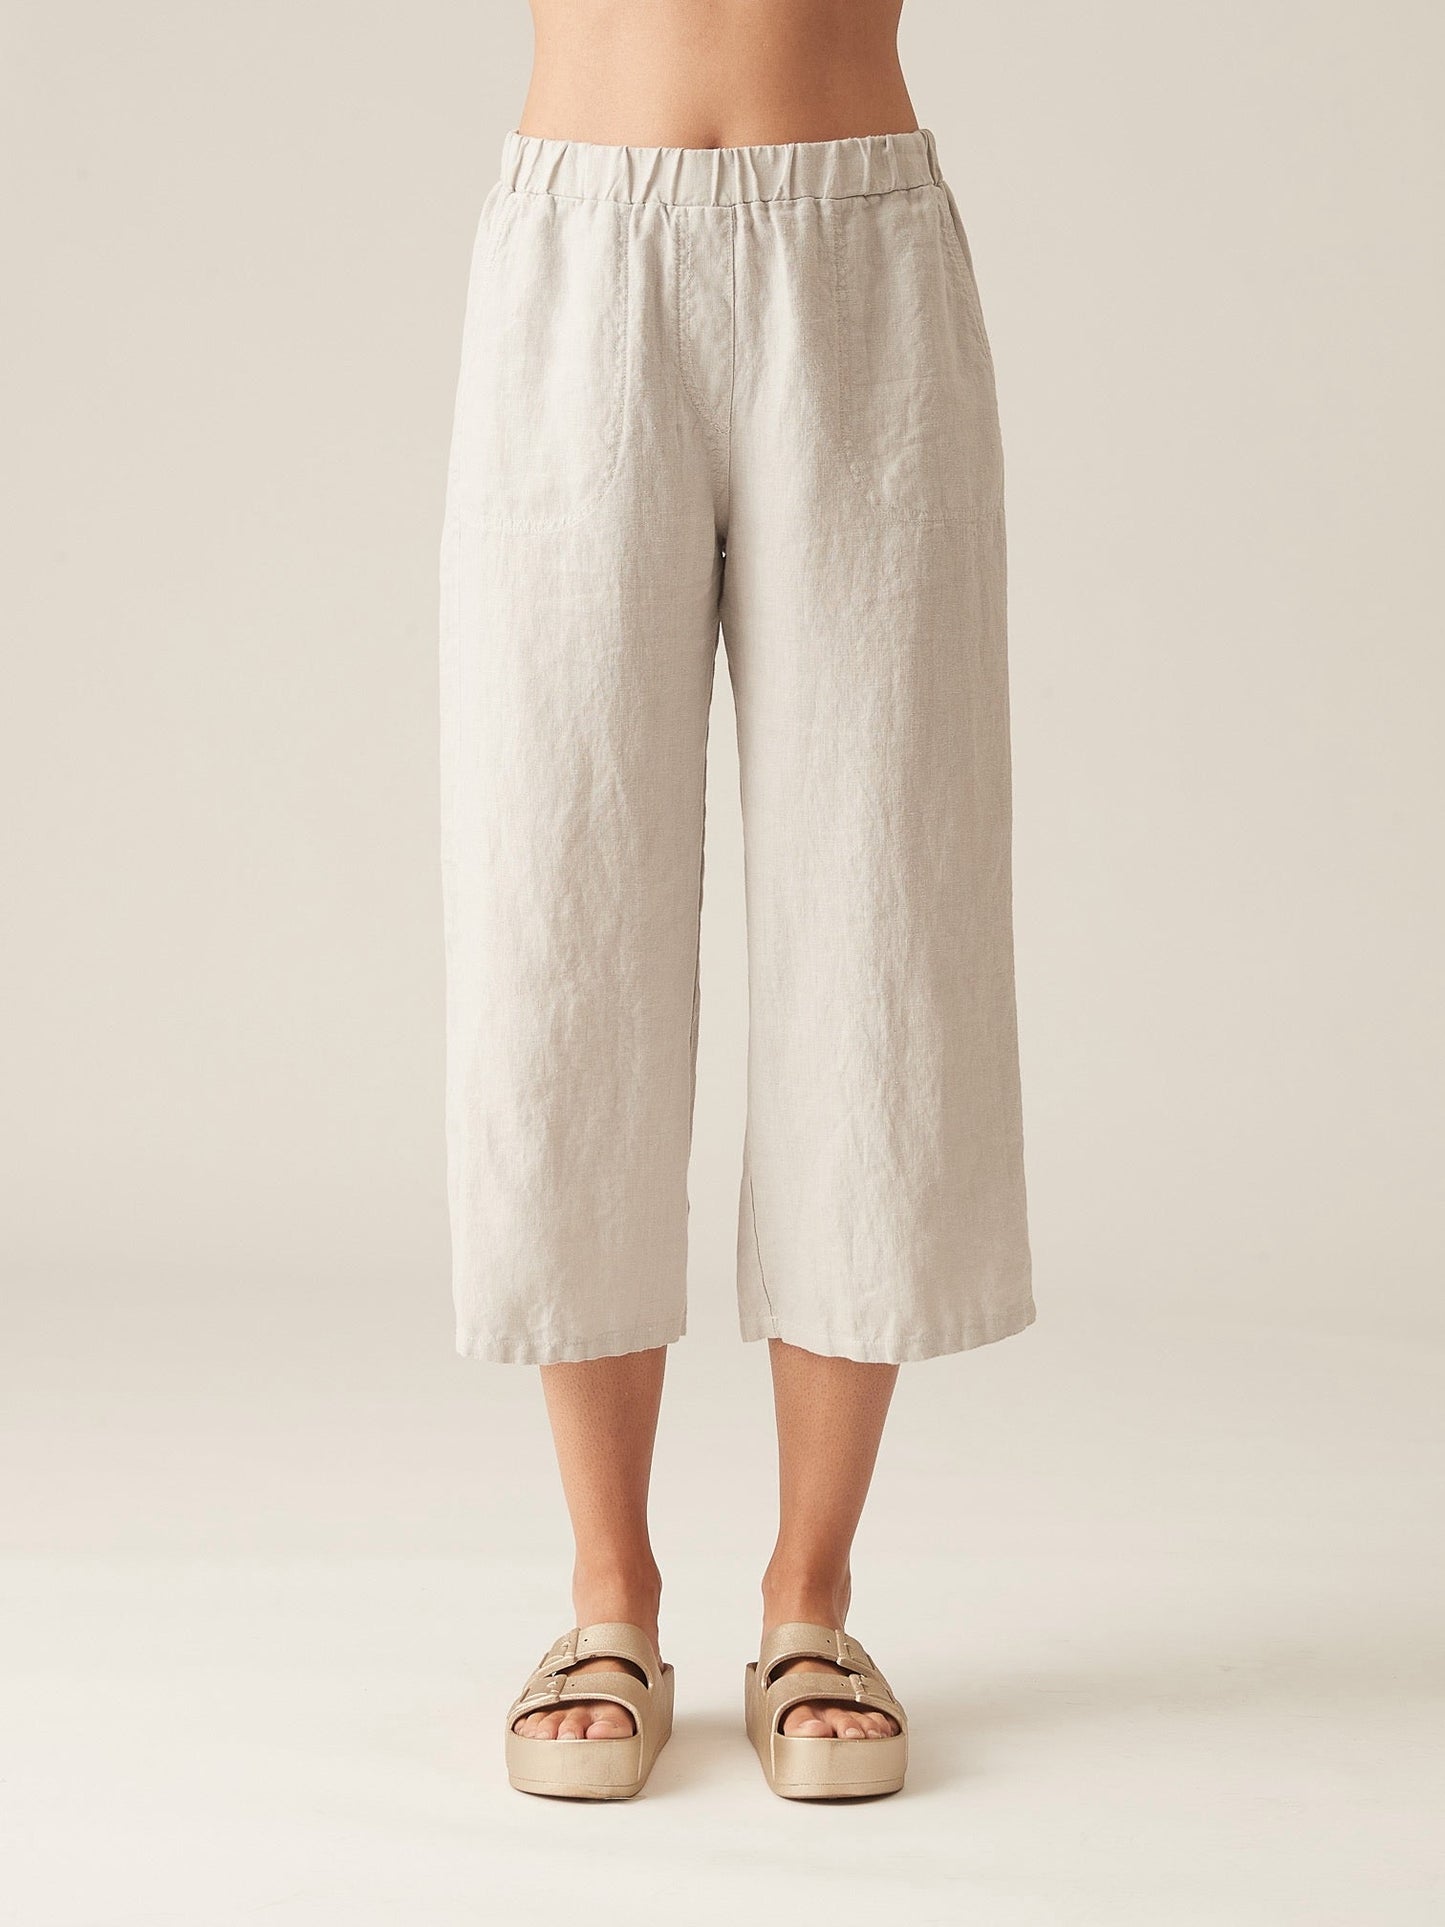 Easy Crop Pant in Linen by Cut-Loose